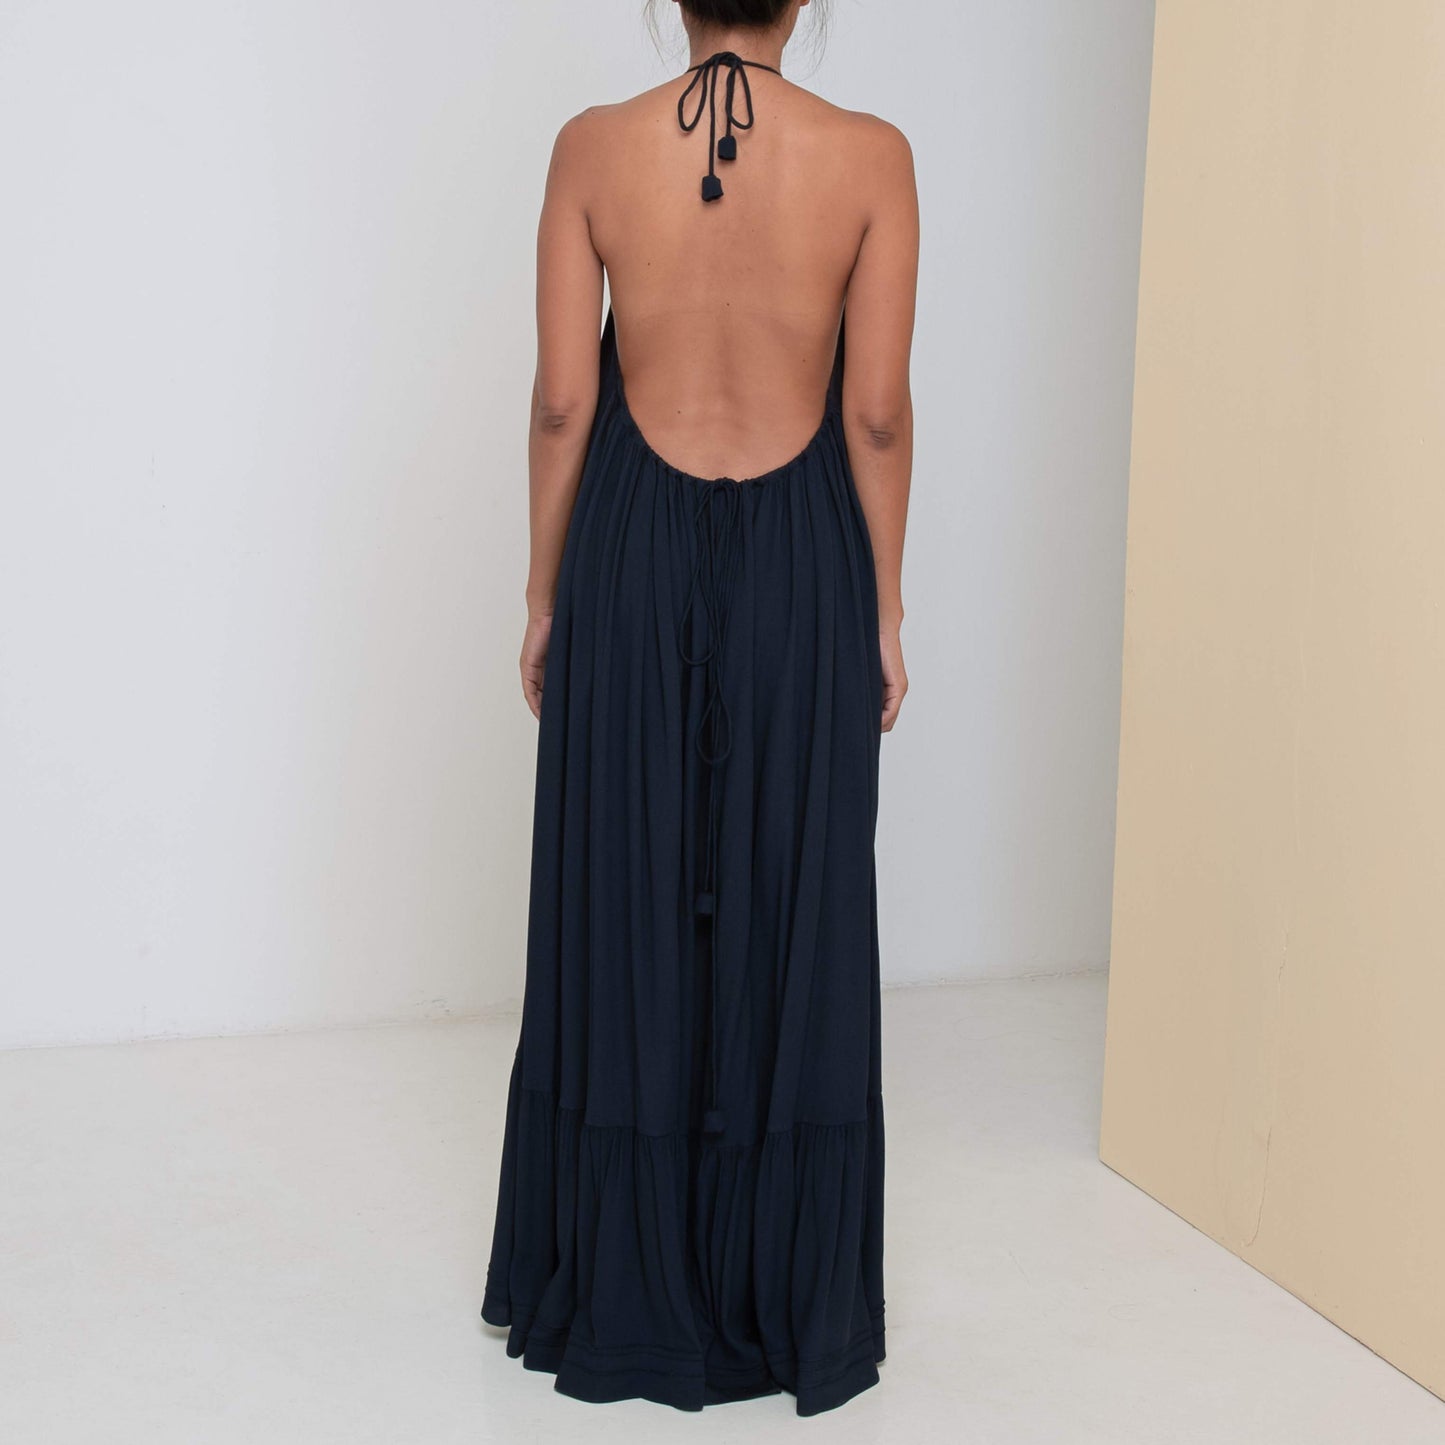 LONG BACKLESS RUFFLED DRESS - Rayon Fujette Crepe | Midnight Blue